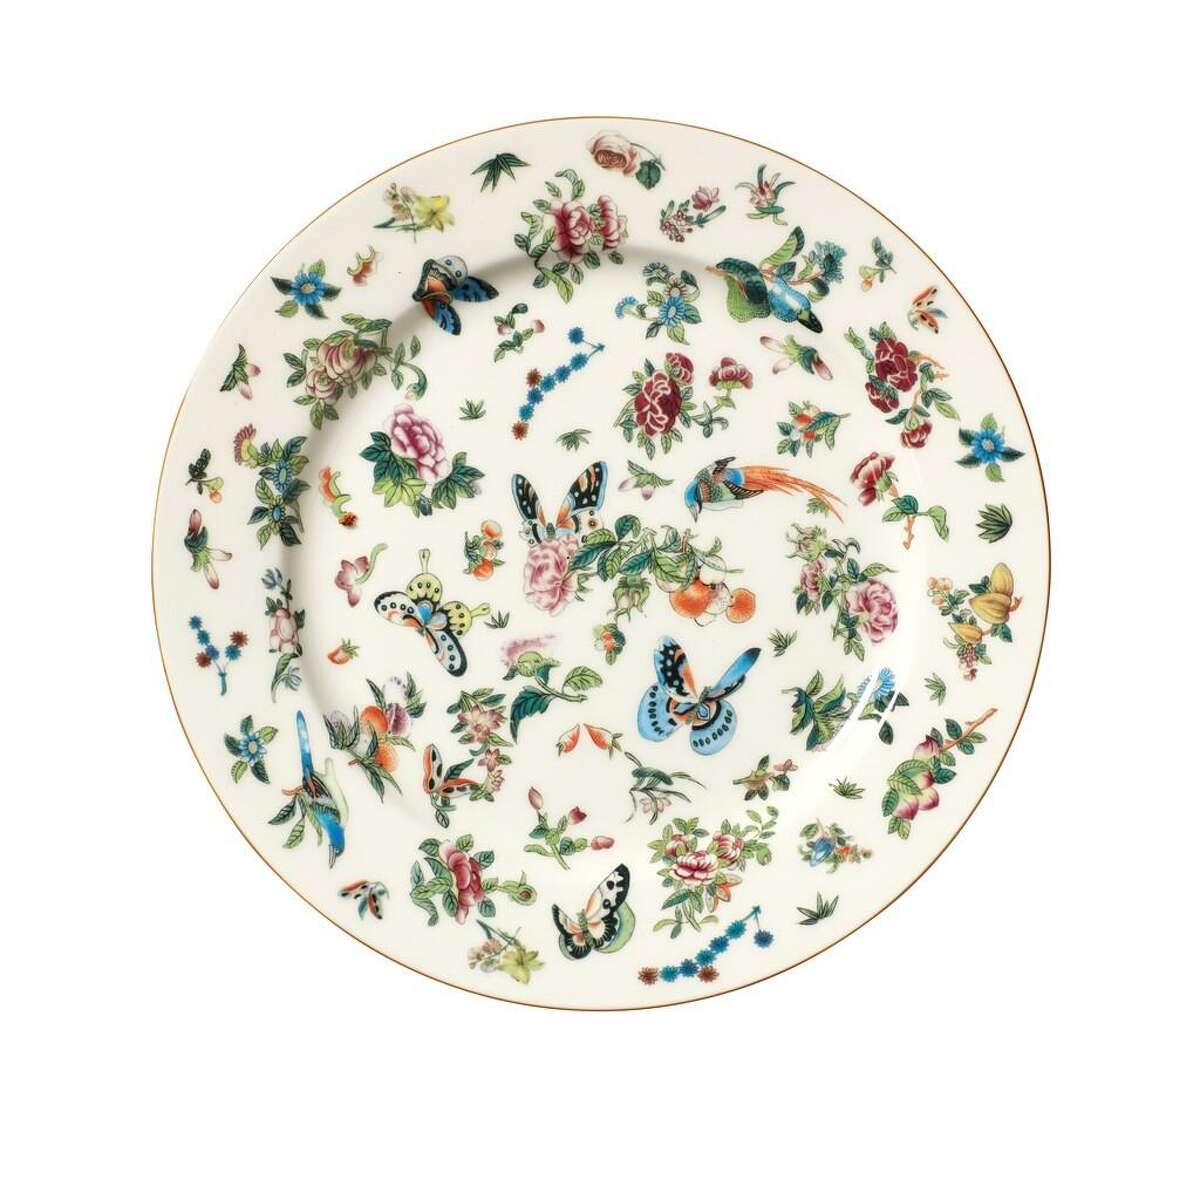 British home goods store OKA is expanding to the U.S. and a shop will open in April 2021 in the storefront on West Alabama that once housed Wisteria. Its inventory includes Adam Lippes collection for OKA, with these Roseraie dishes.